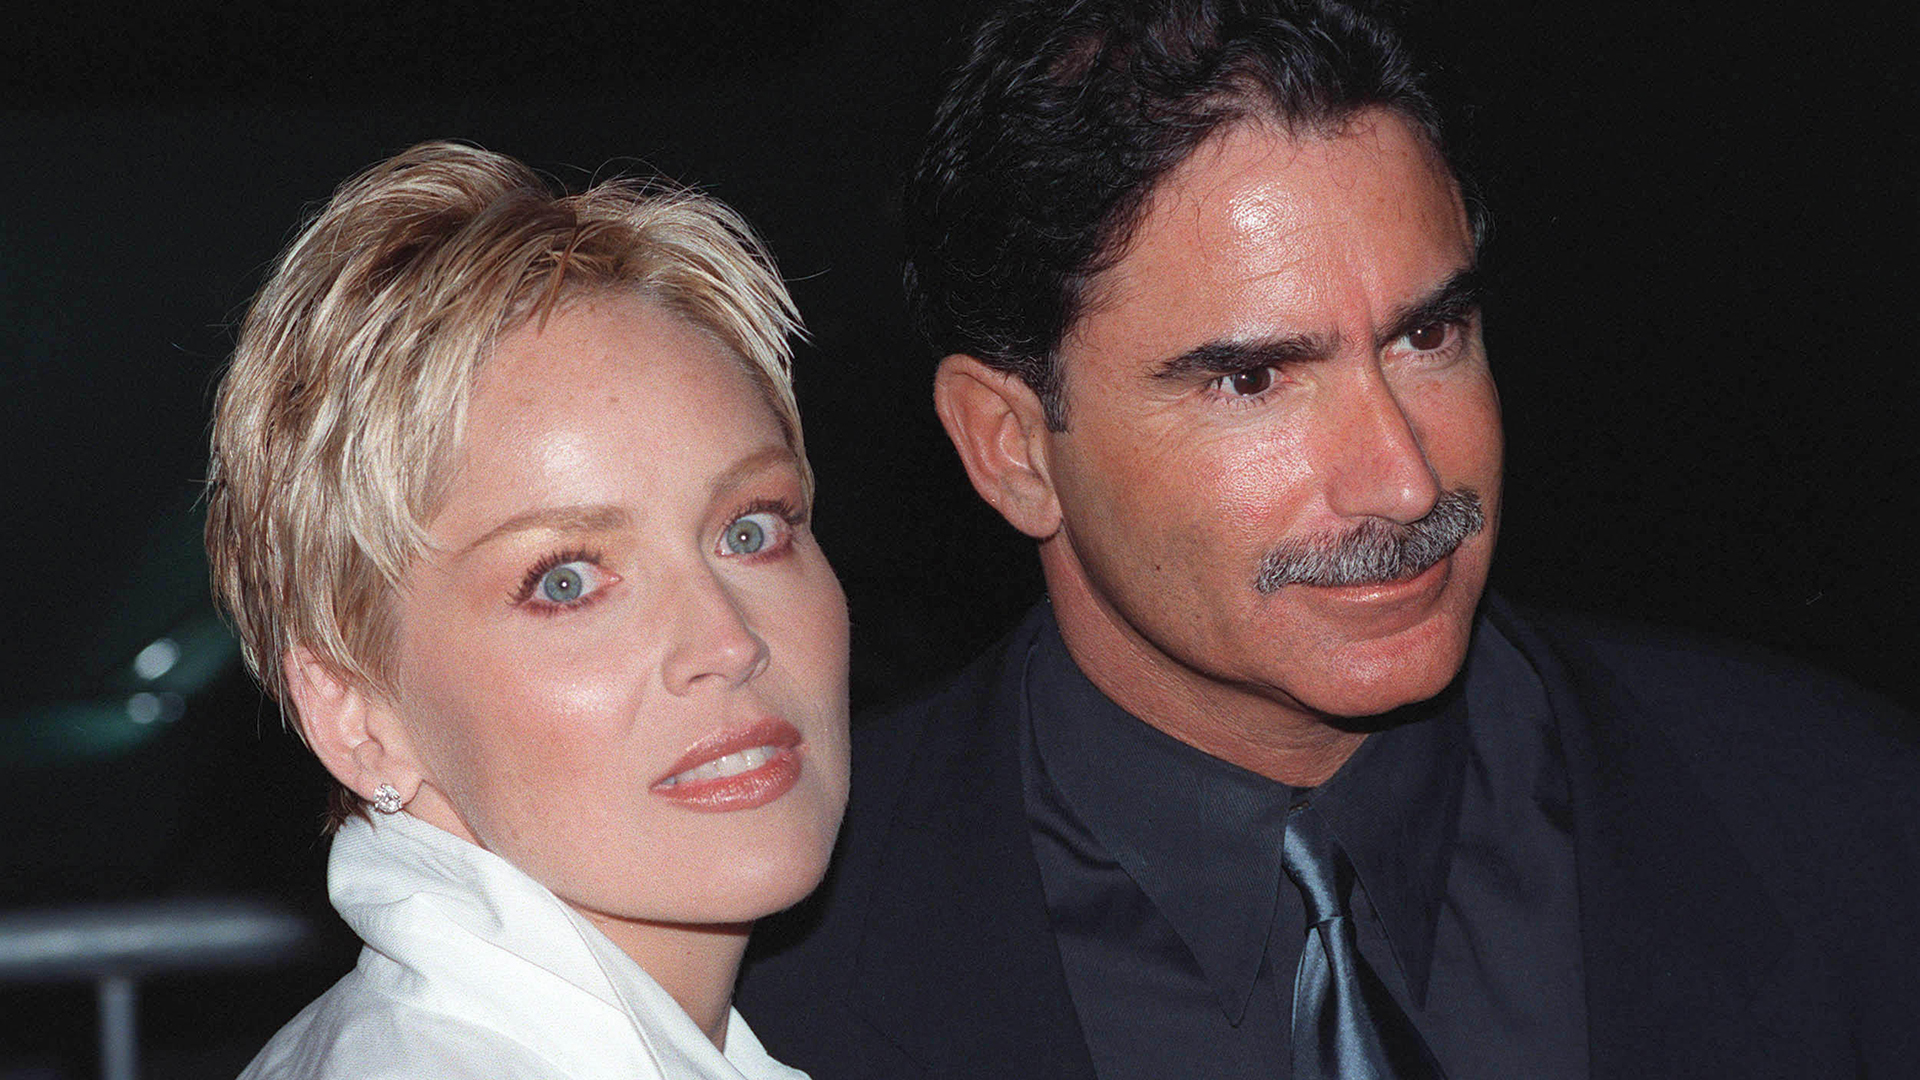 Redefining Red Carpet Fashion: Sharon Stone's Unforgettable Oscar Moment